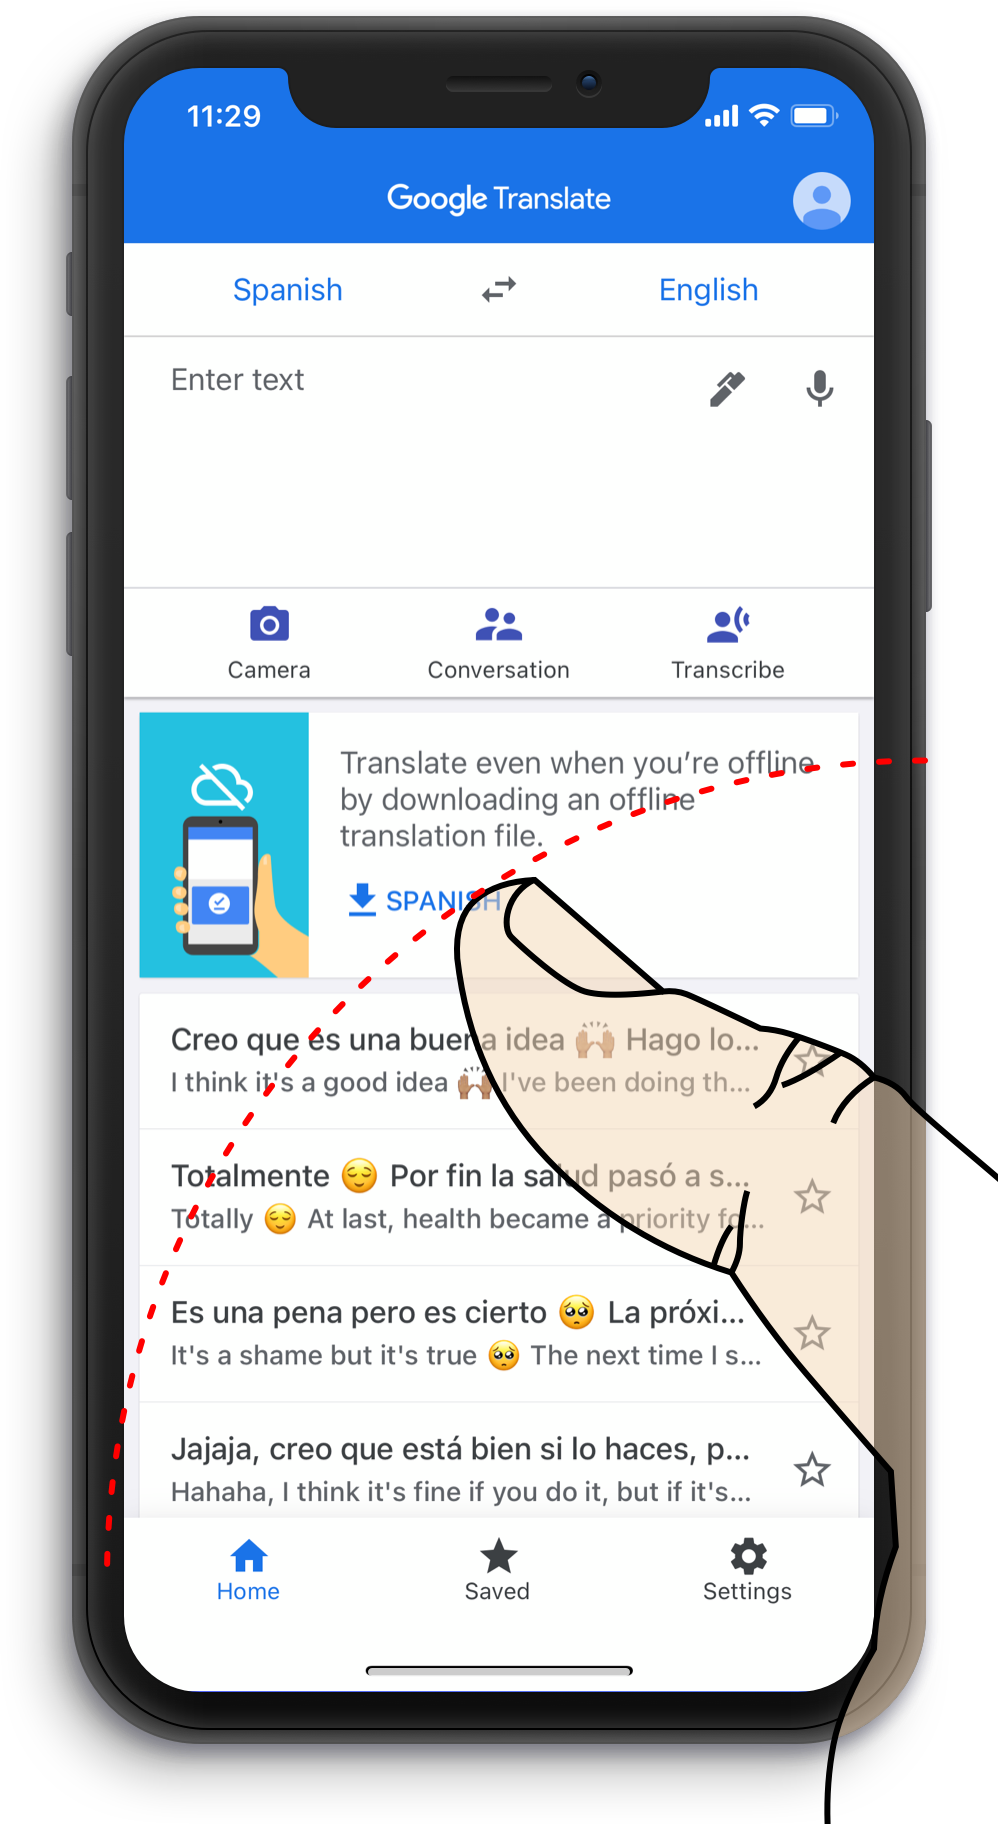 Google Translate current App displayed on iPhone screen